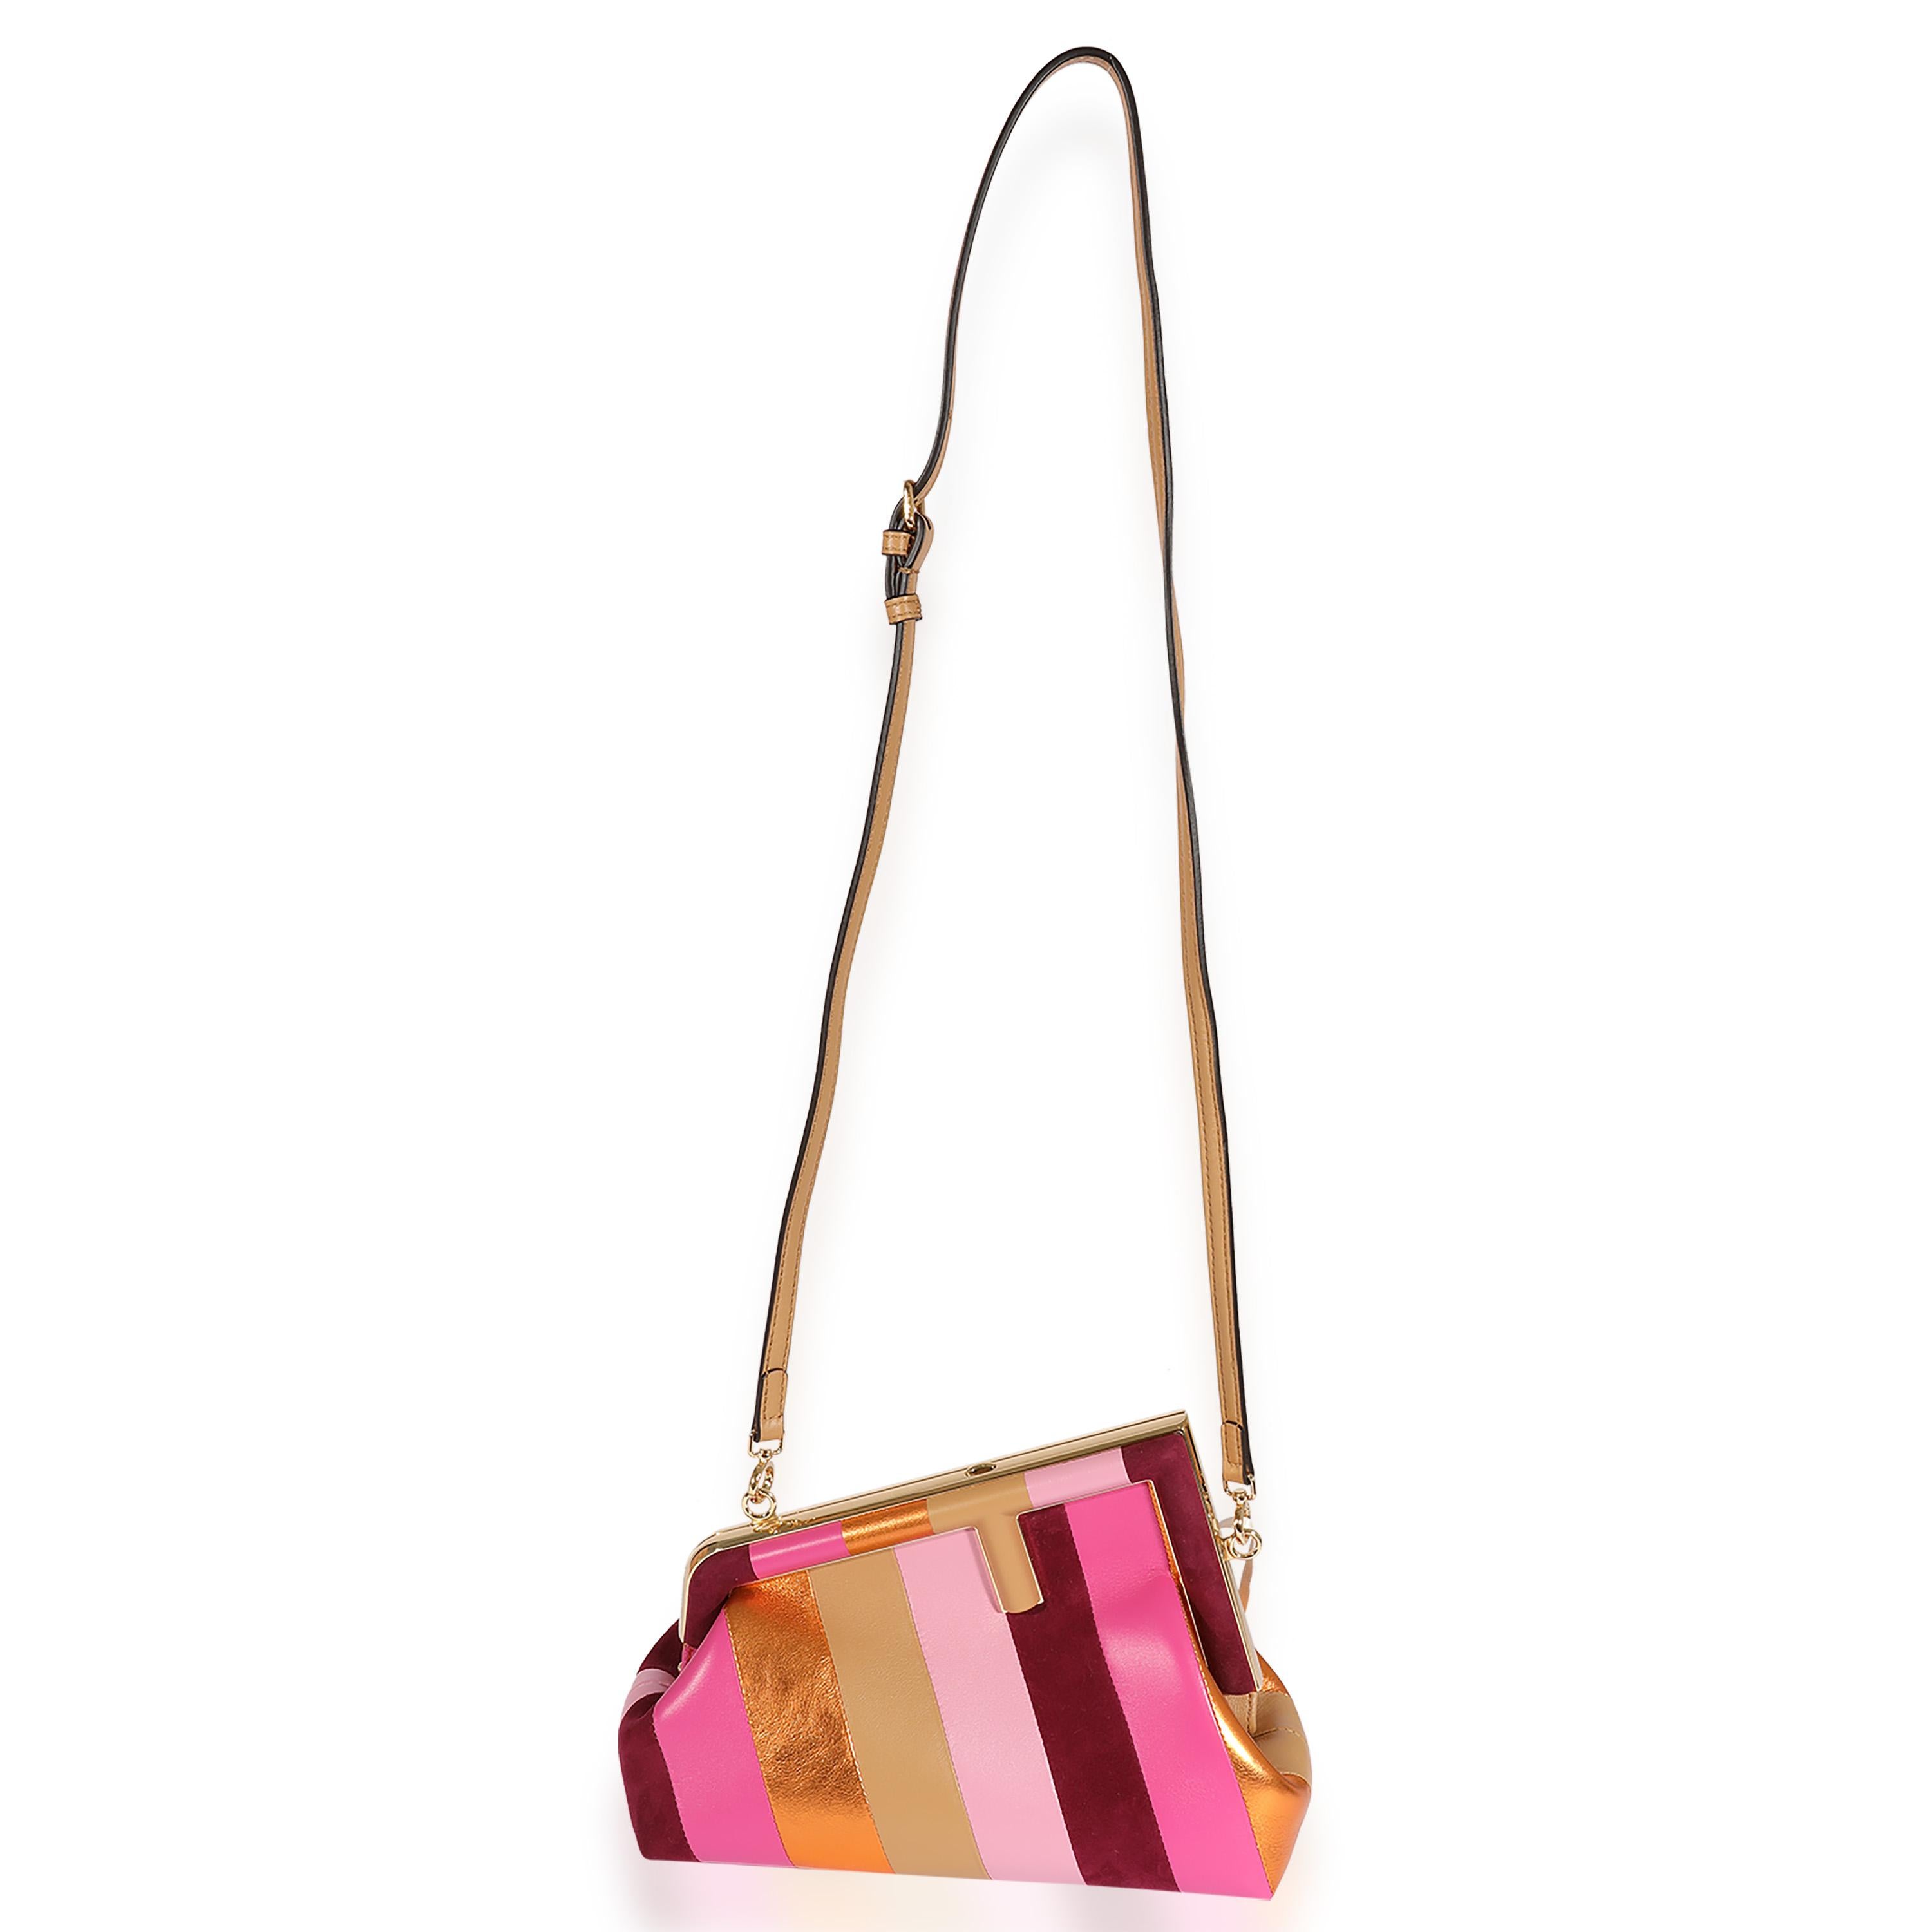 Listing Title: Fendi Multicolor Stripe Leather & Suede Small First Bag
SKU: 123498
MSRP: 3950.00
Condition: Pre-owned 
Handbag Condition: Excellent
Condition Comments: Excellent Condition. Plastic at some hardware. Faint scuffing at suede.
Brand: